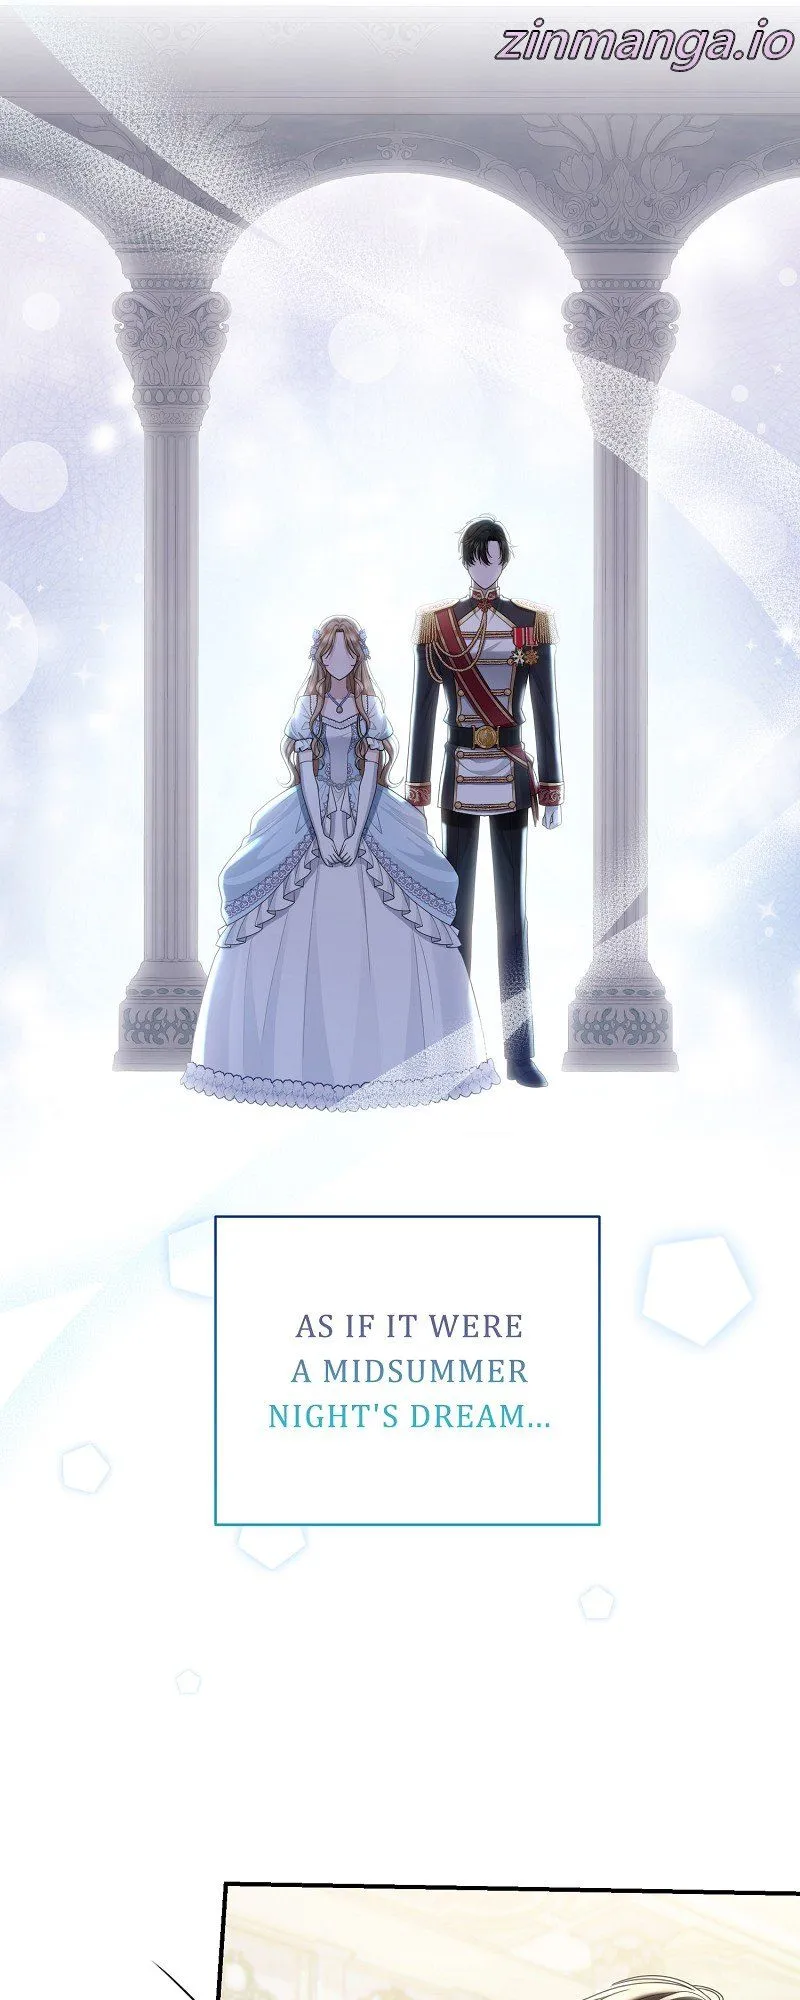 When Cinderella’s Magic Fades Away chapter 3